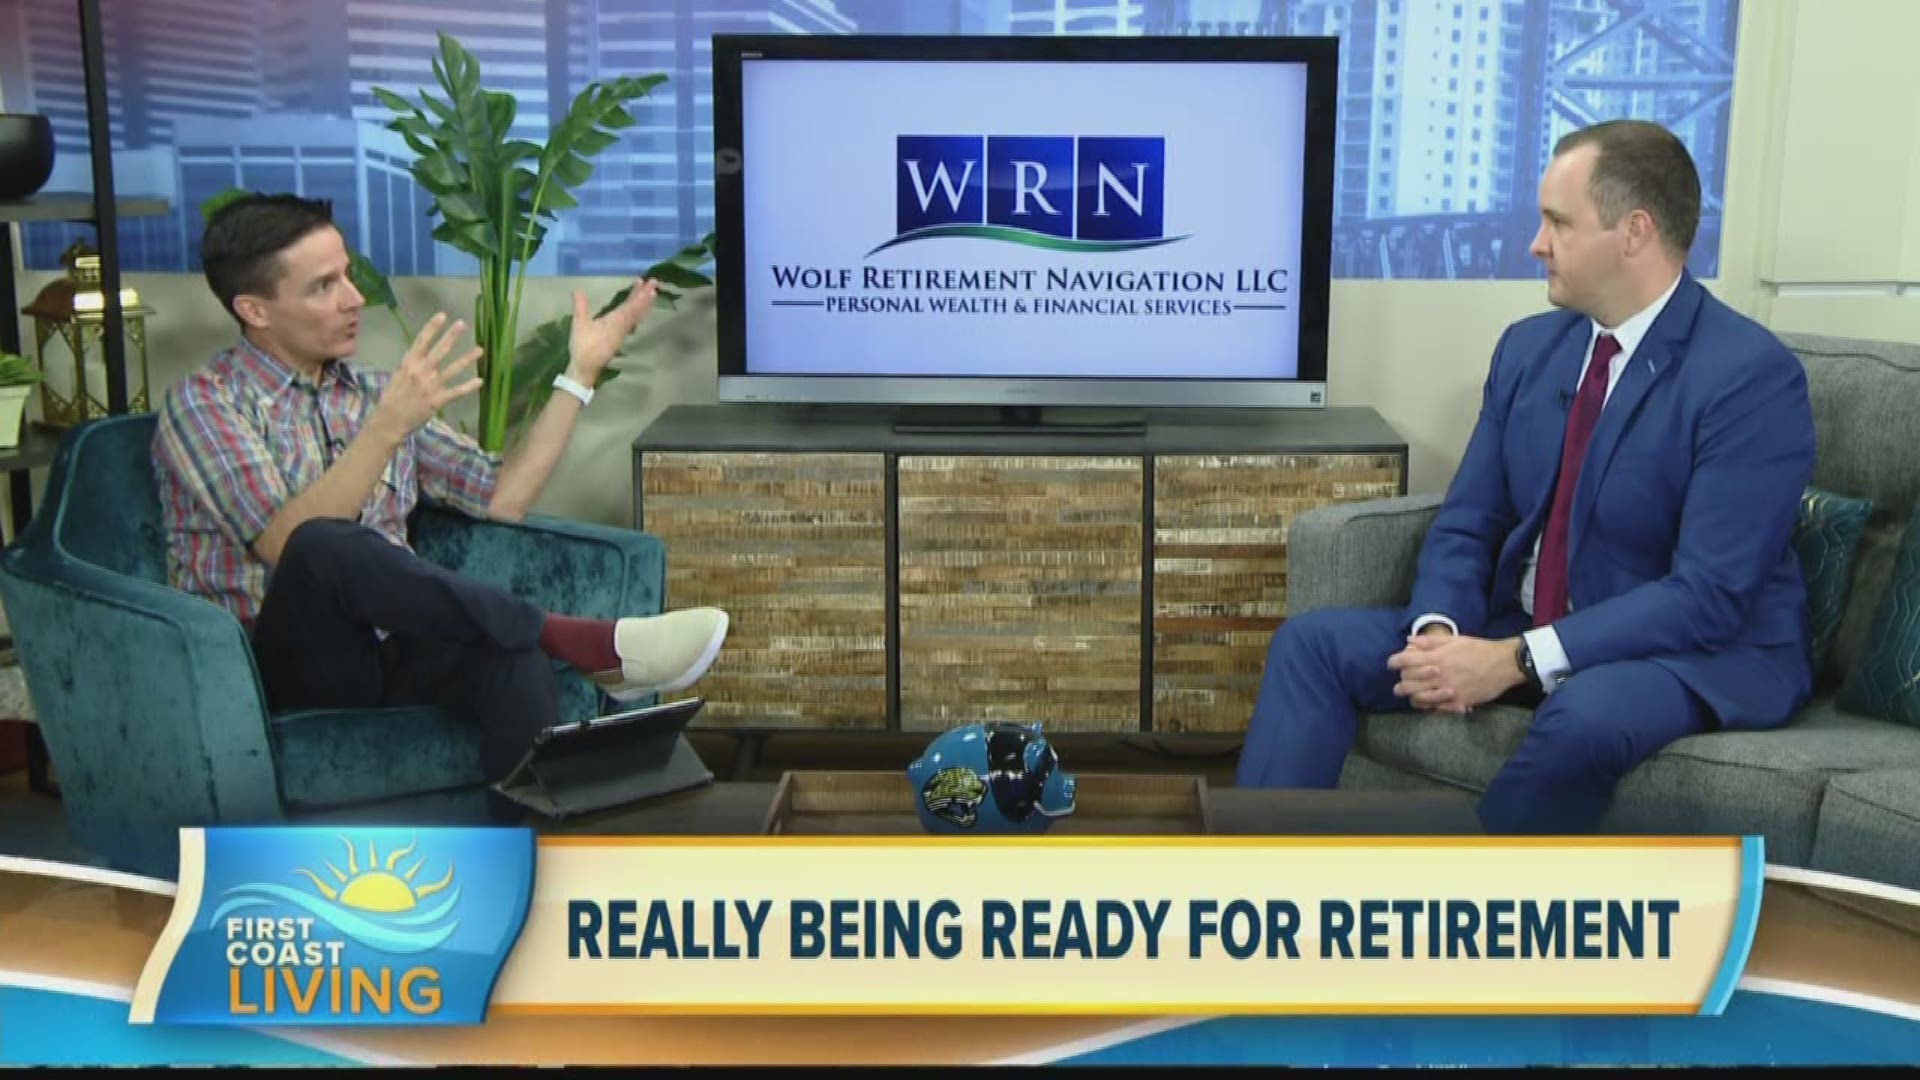 Are you ready for retirement?